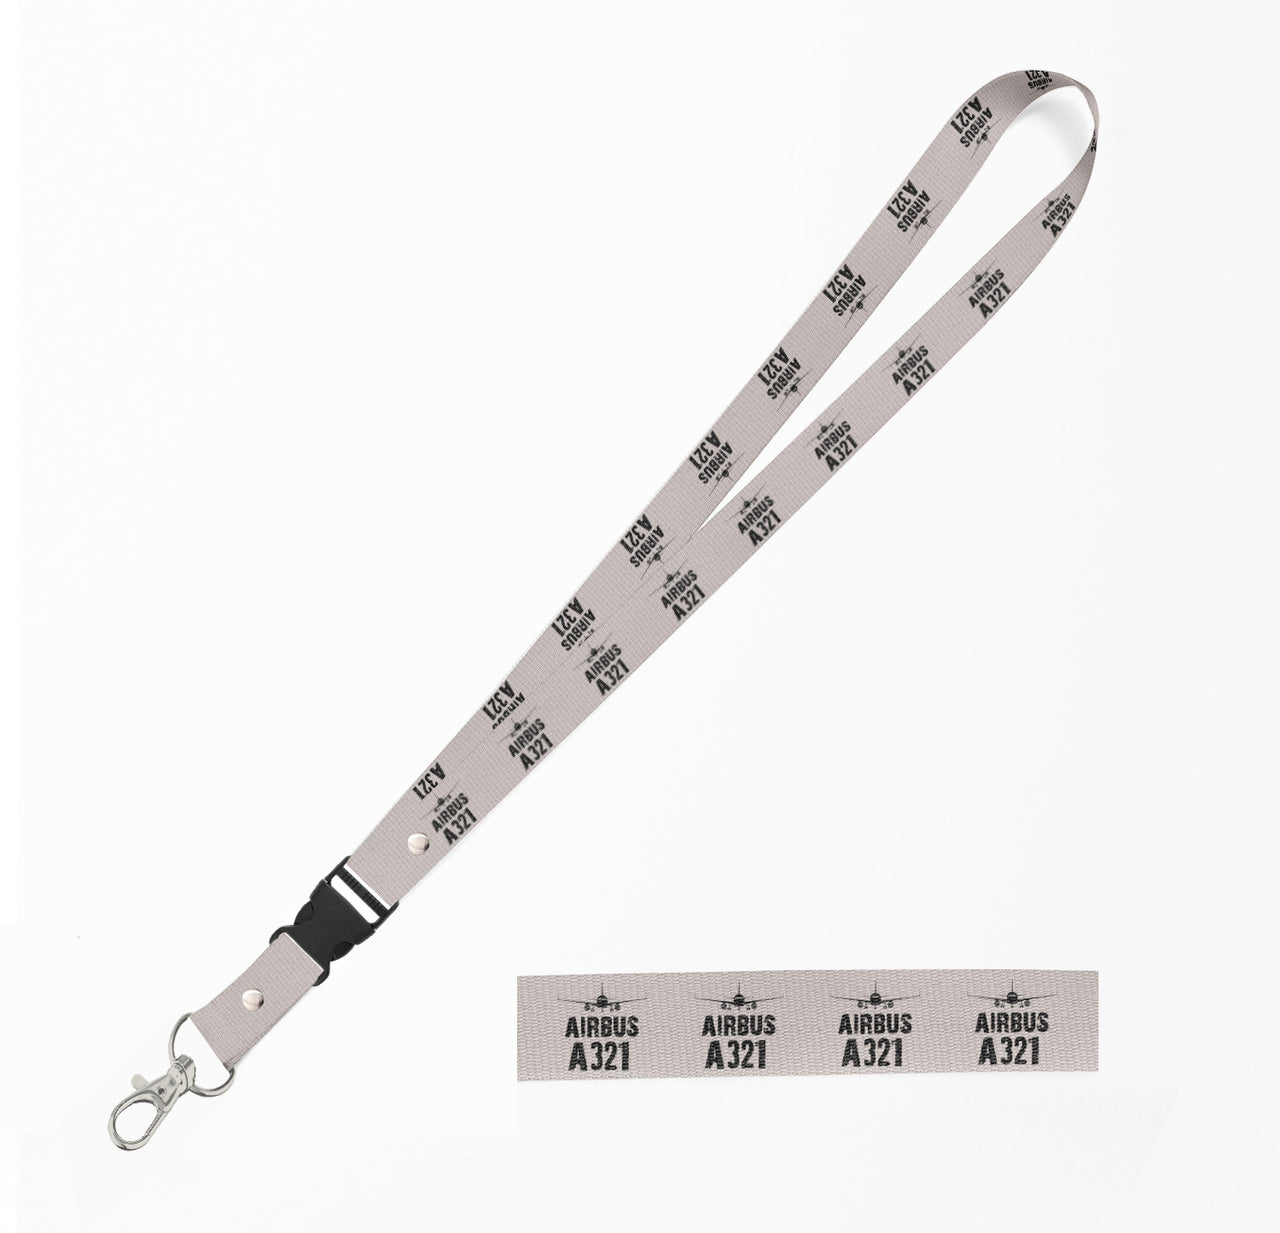 Airbus A321 & Plane Designed Detachable Lanyard & ID Holders